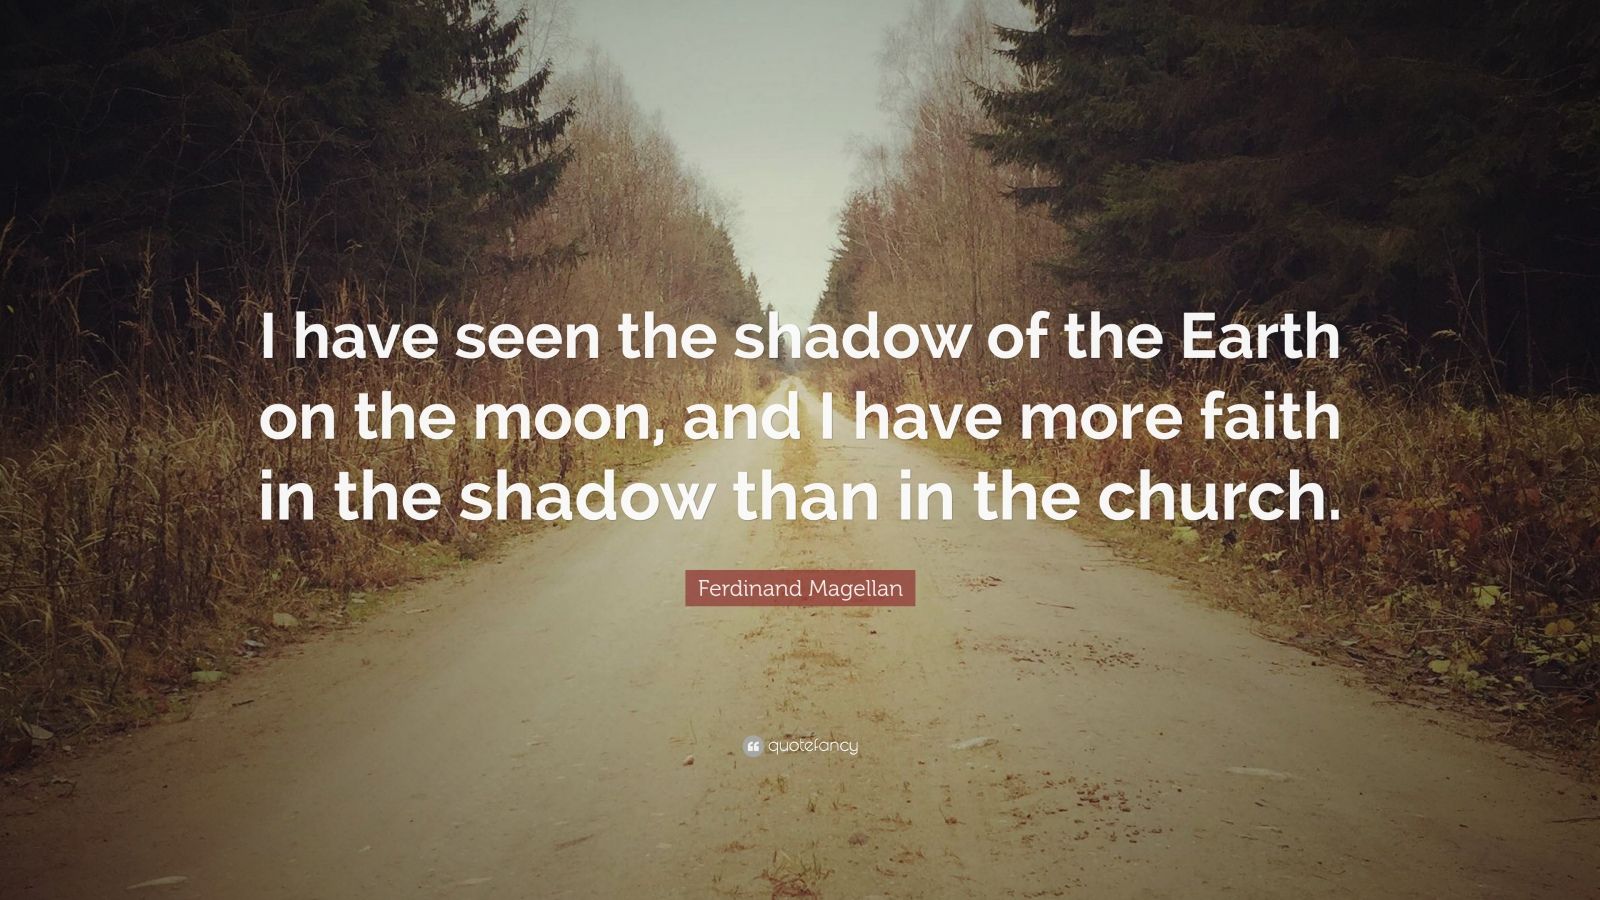 Ferdinand Magellan Quote “I have seen the shadow of the Earth on the